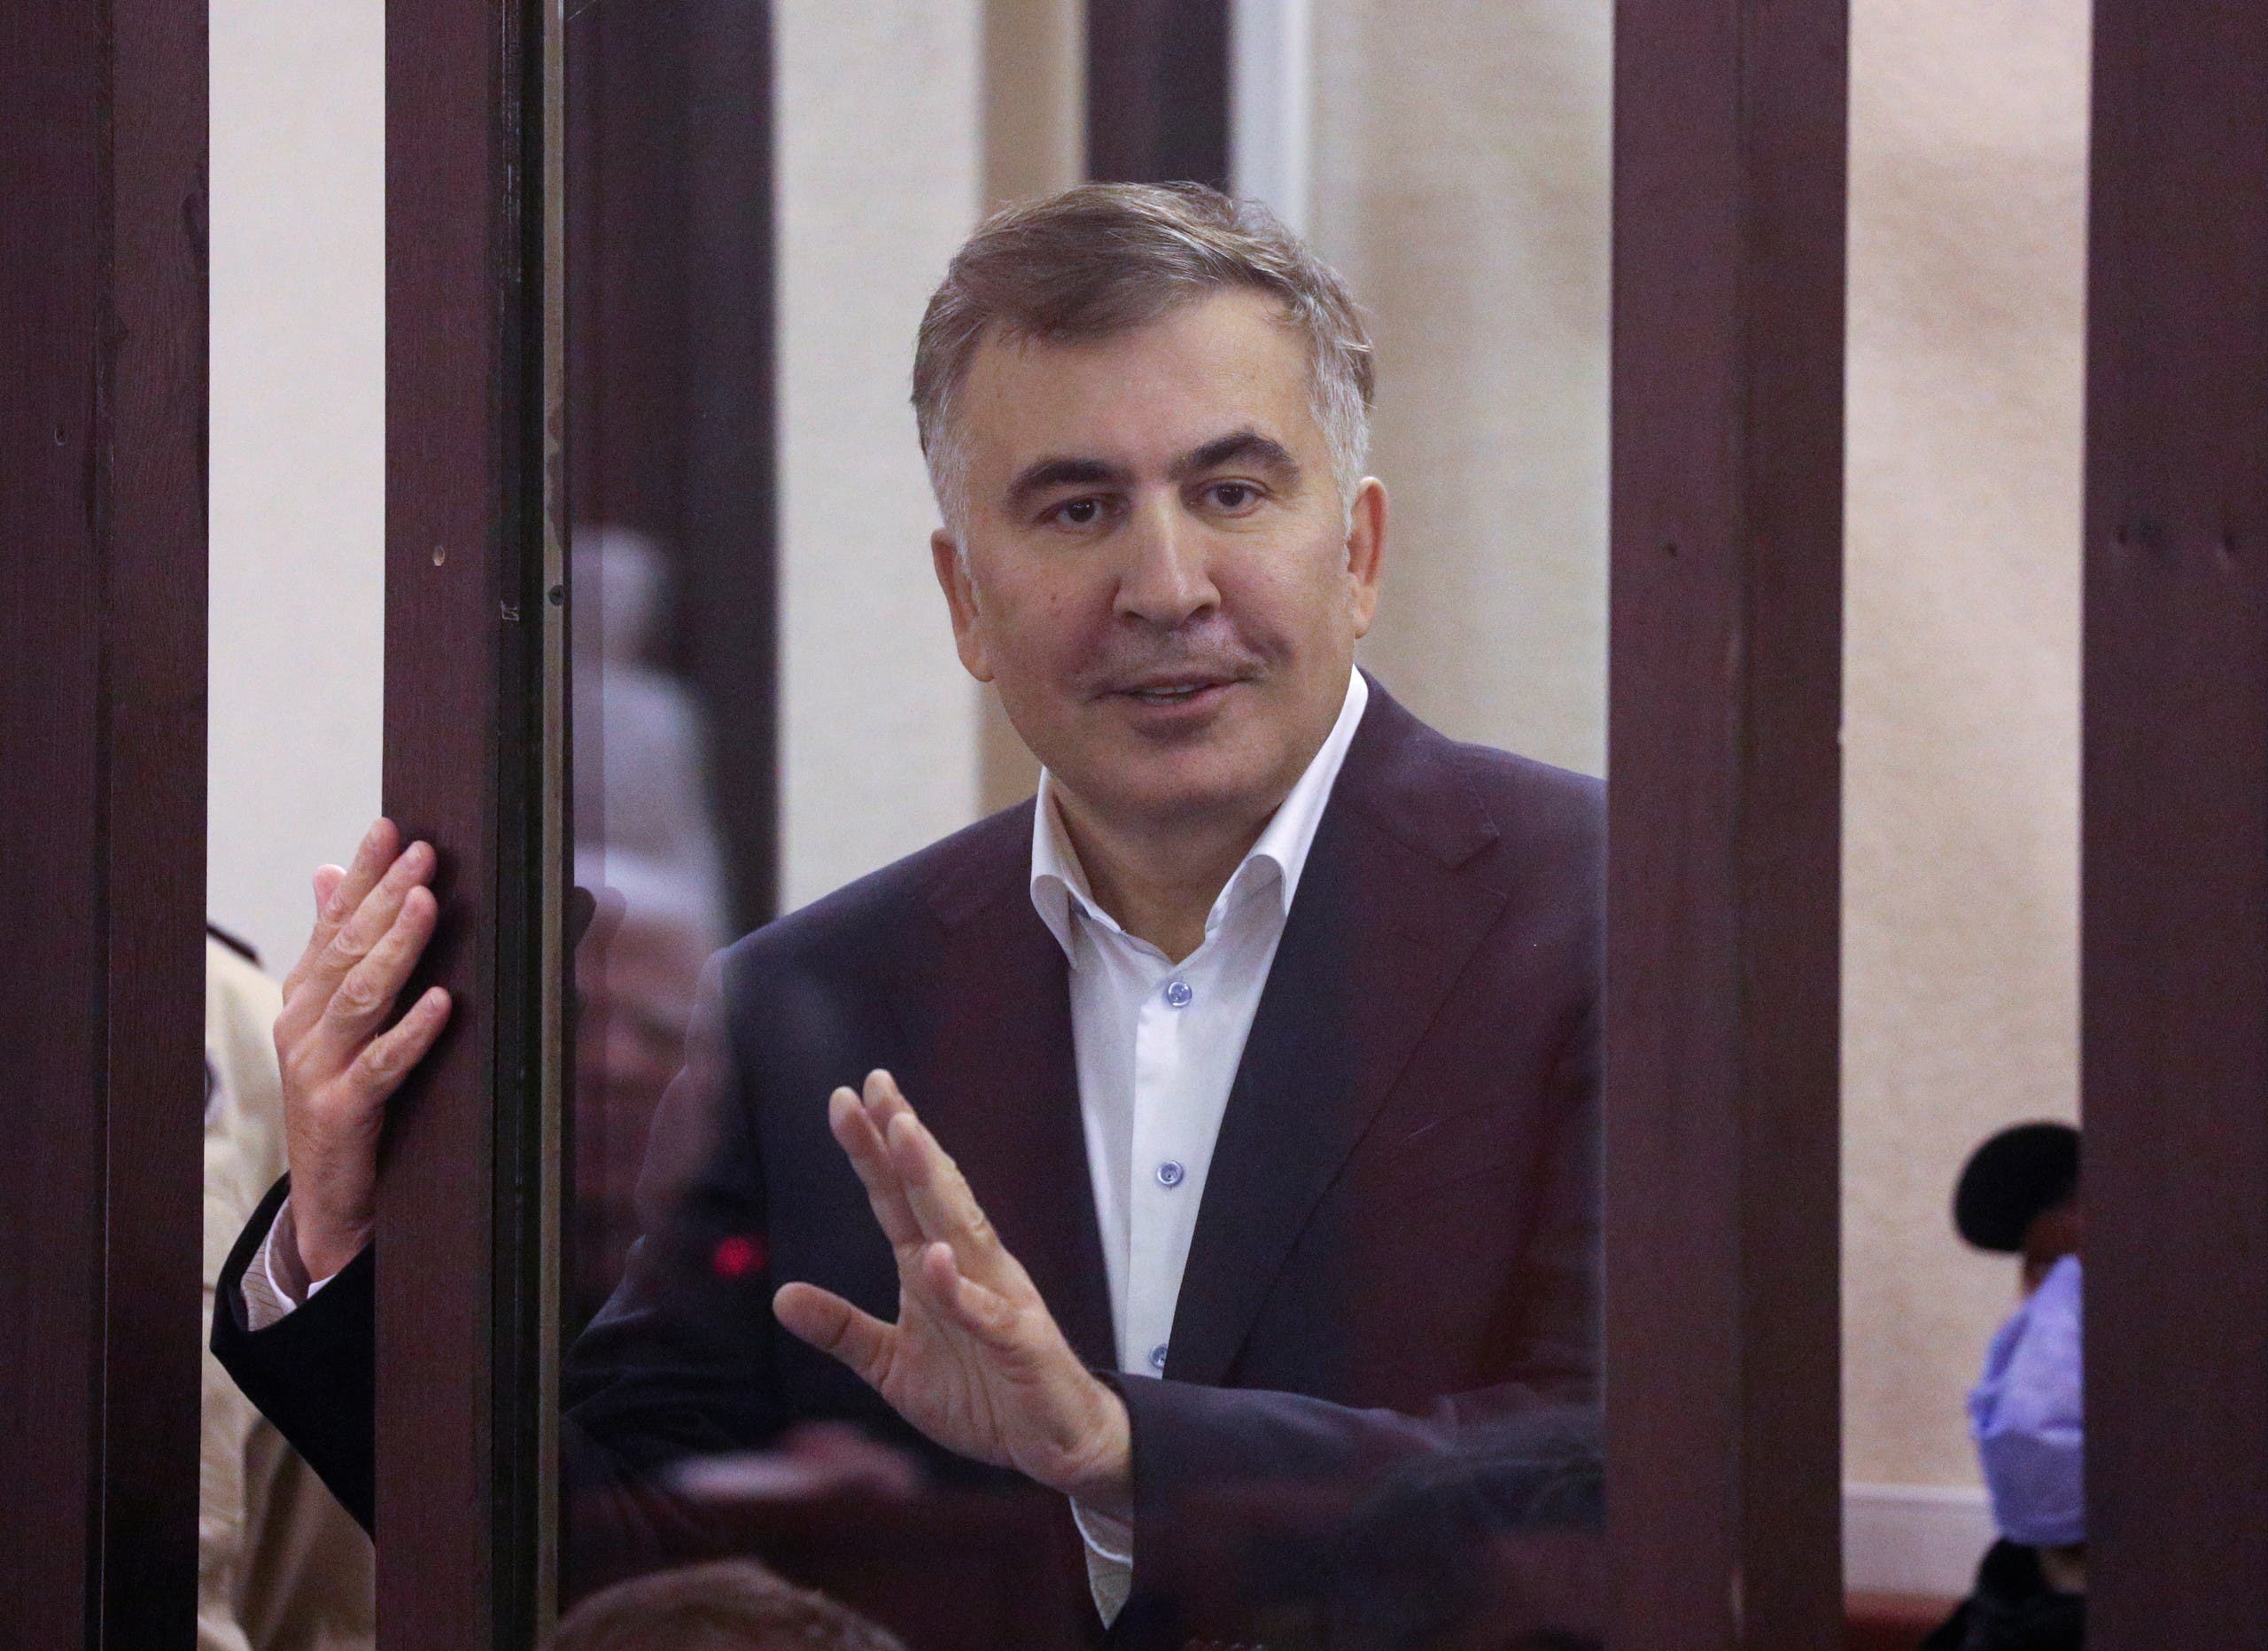 Saakashvili during one of his court sessions in Tbilisi last December